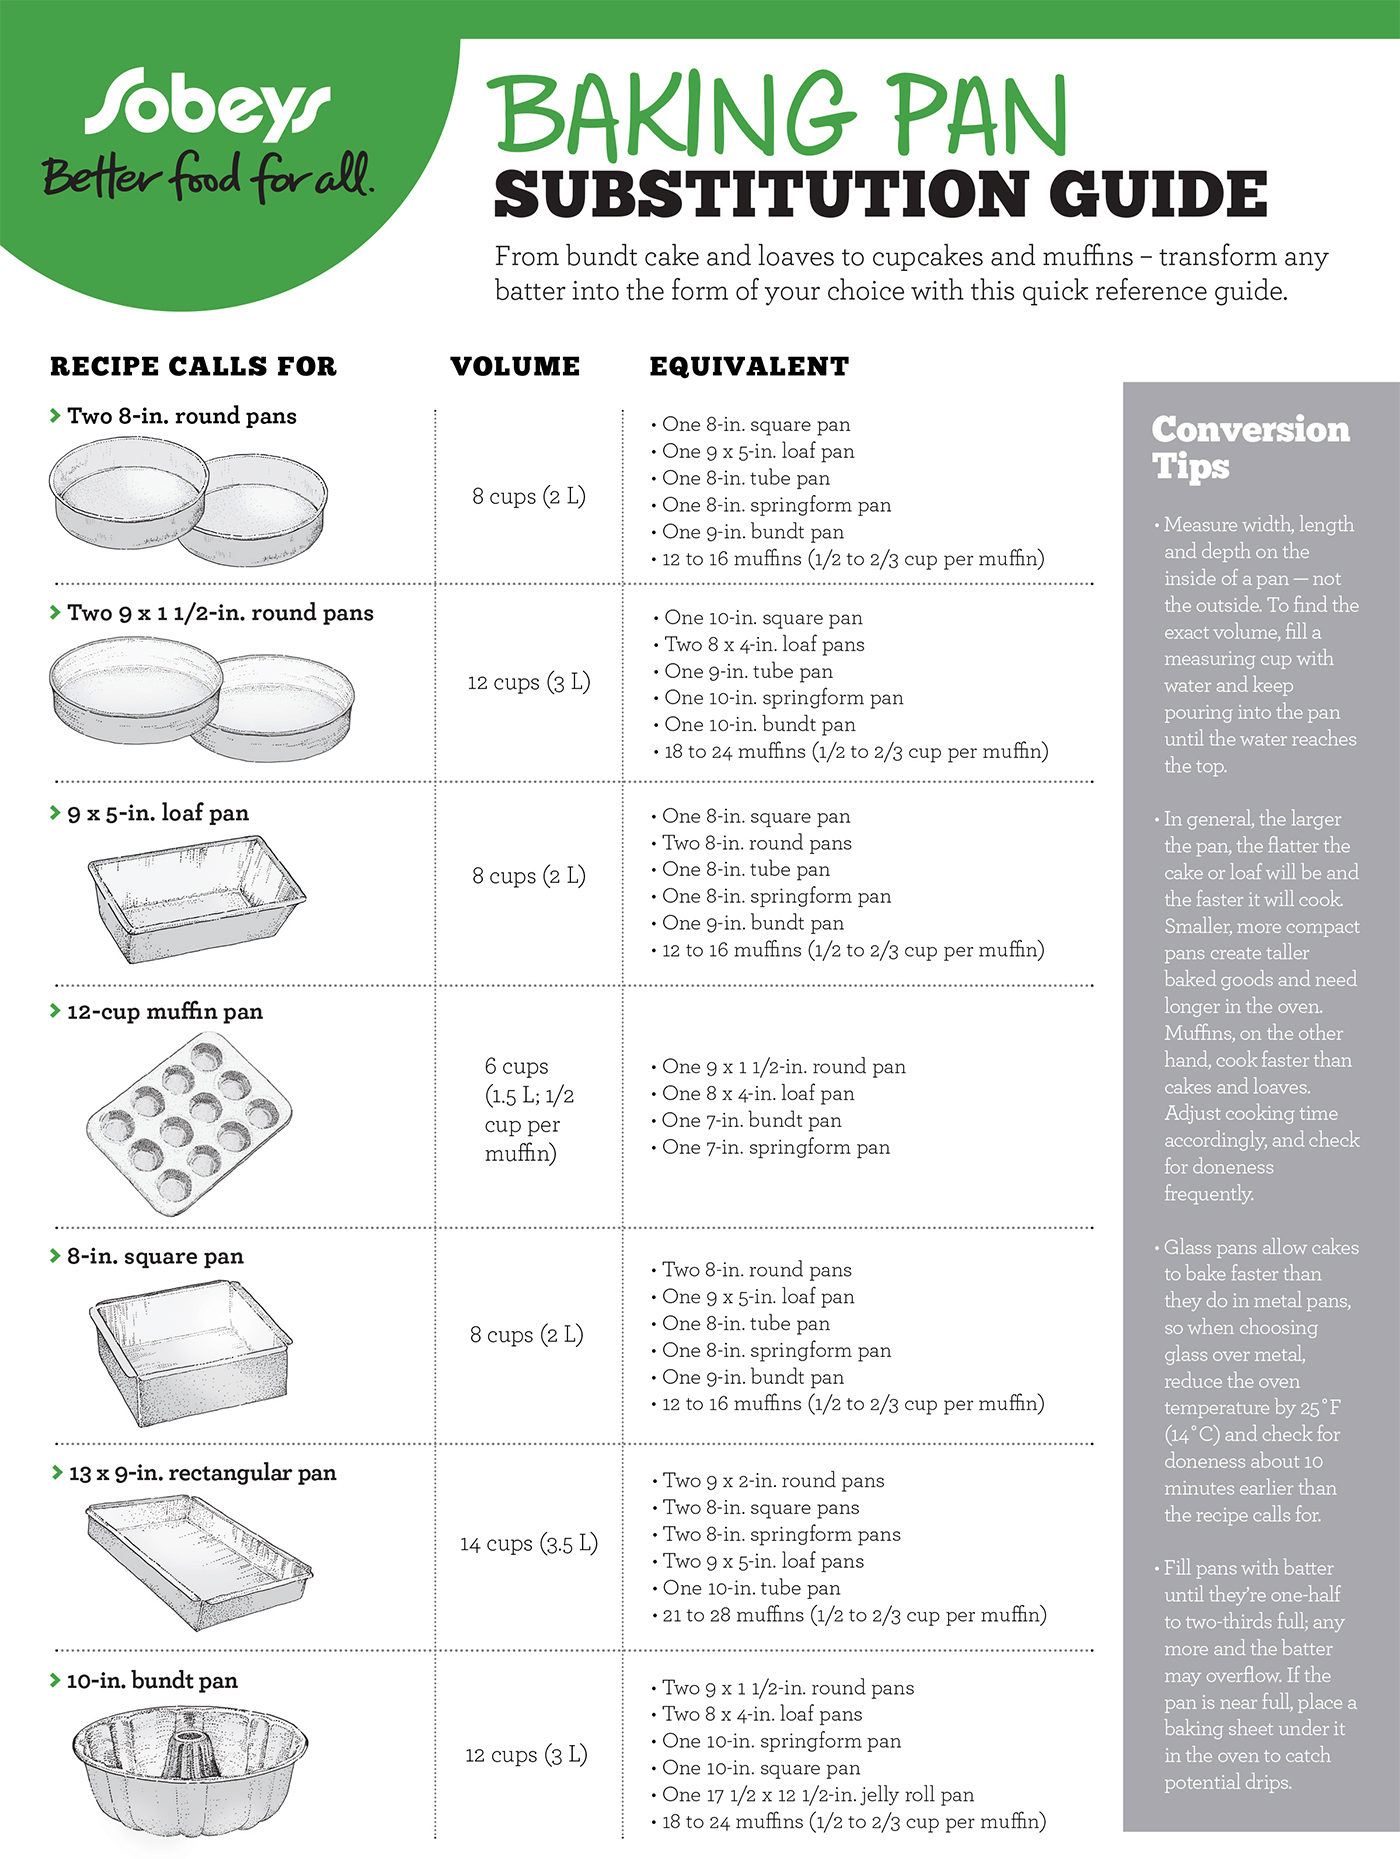 baking-pan-substitution-guide-sobeys-inc